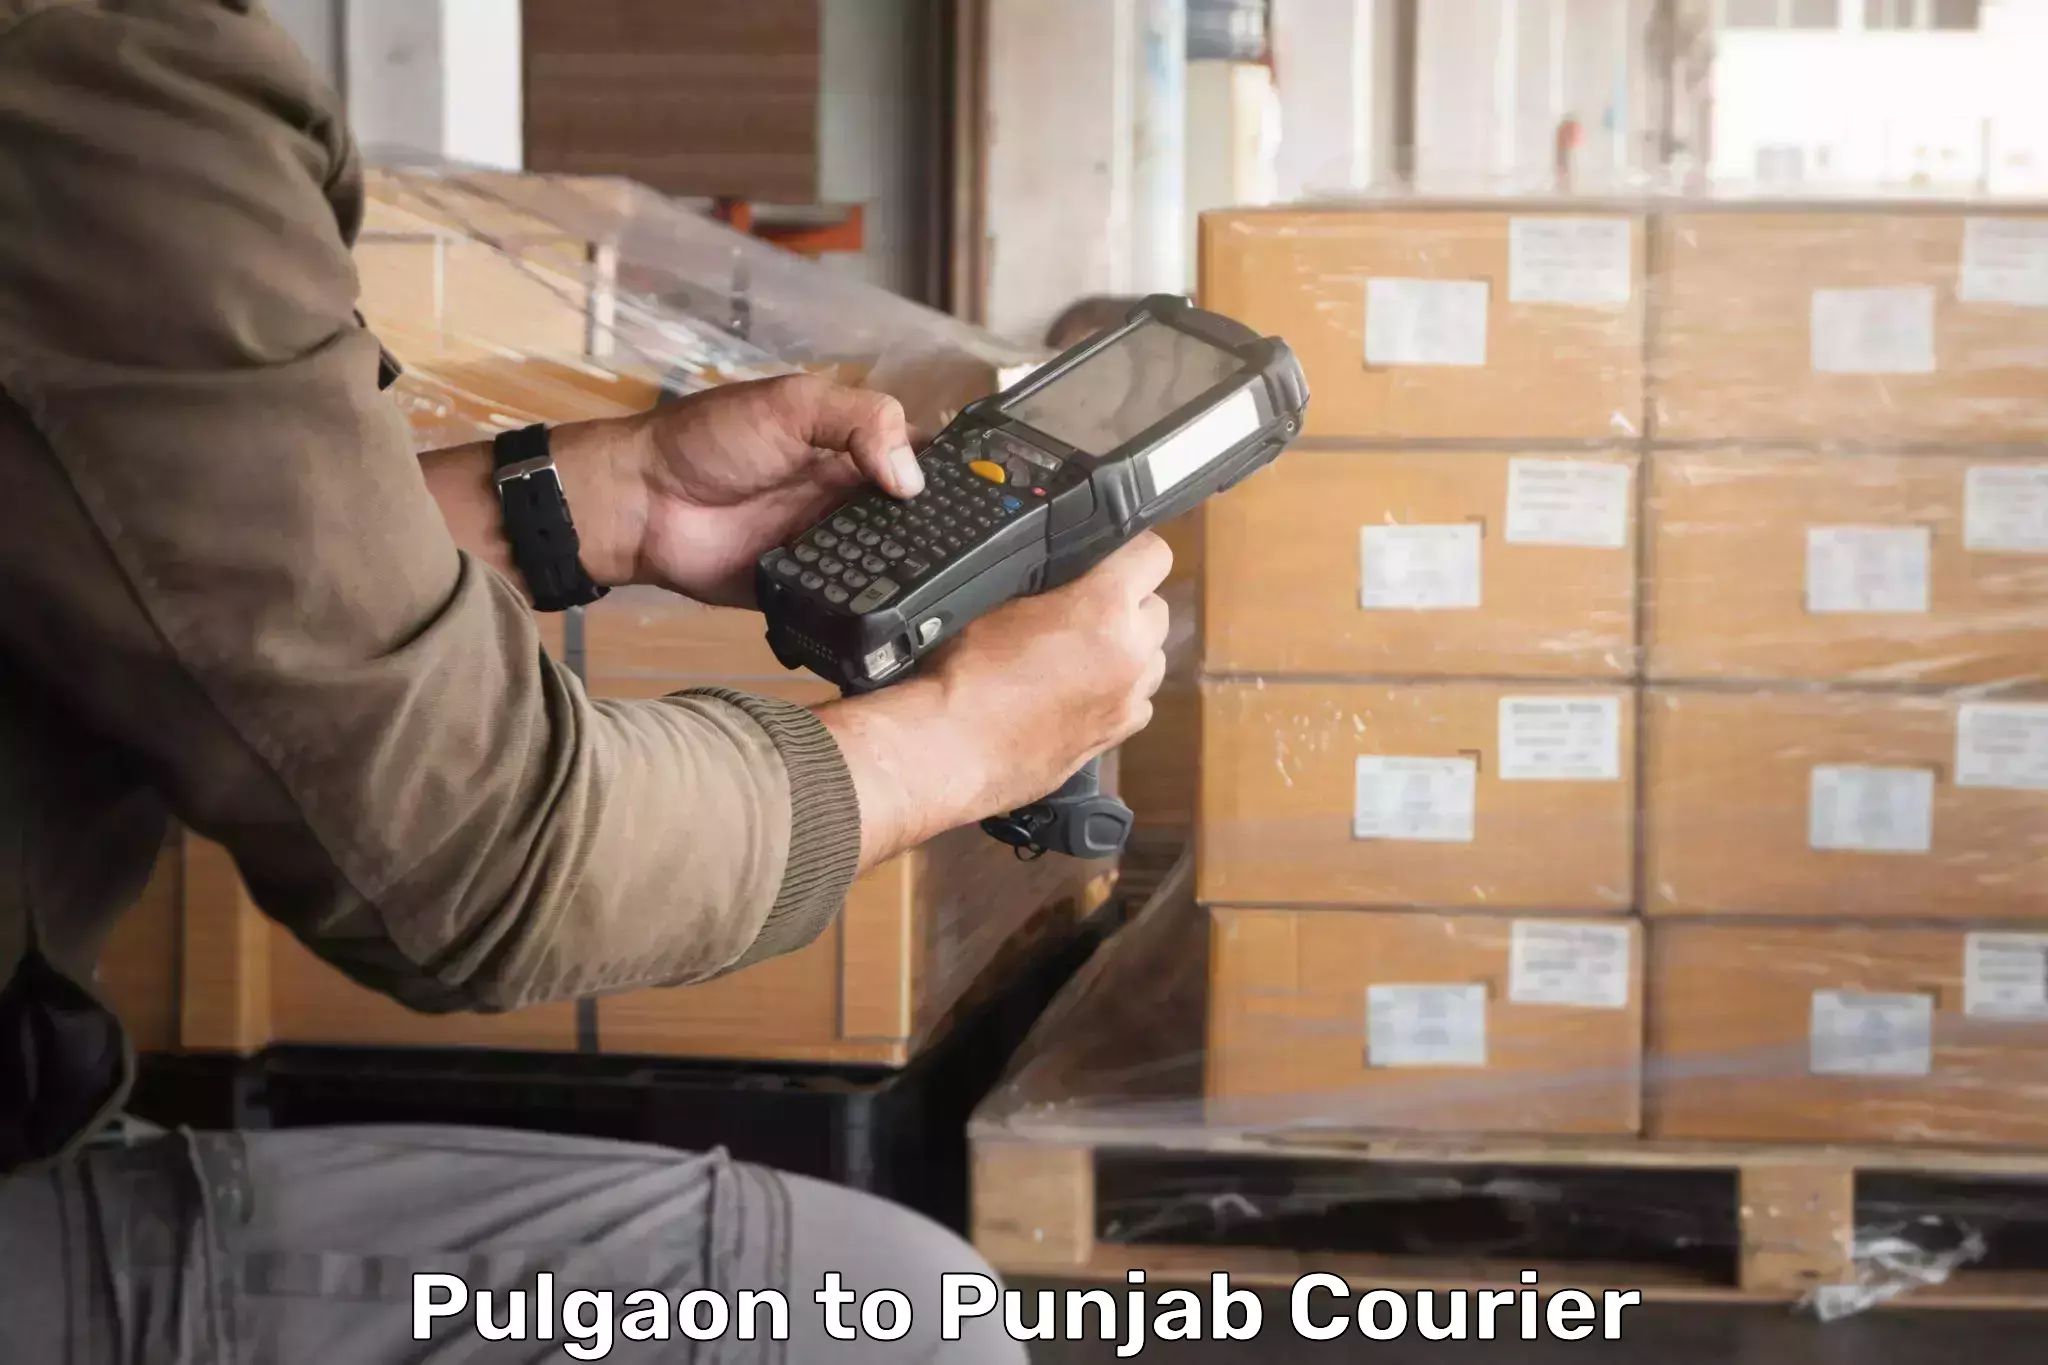 Nationwide courier service Pulgaon to Punjab